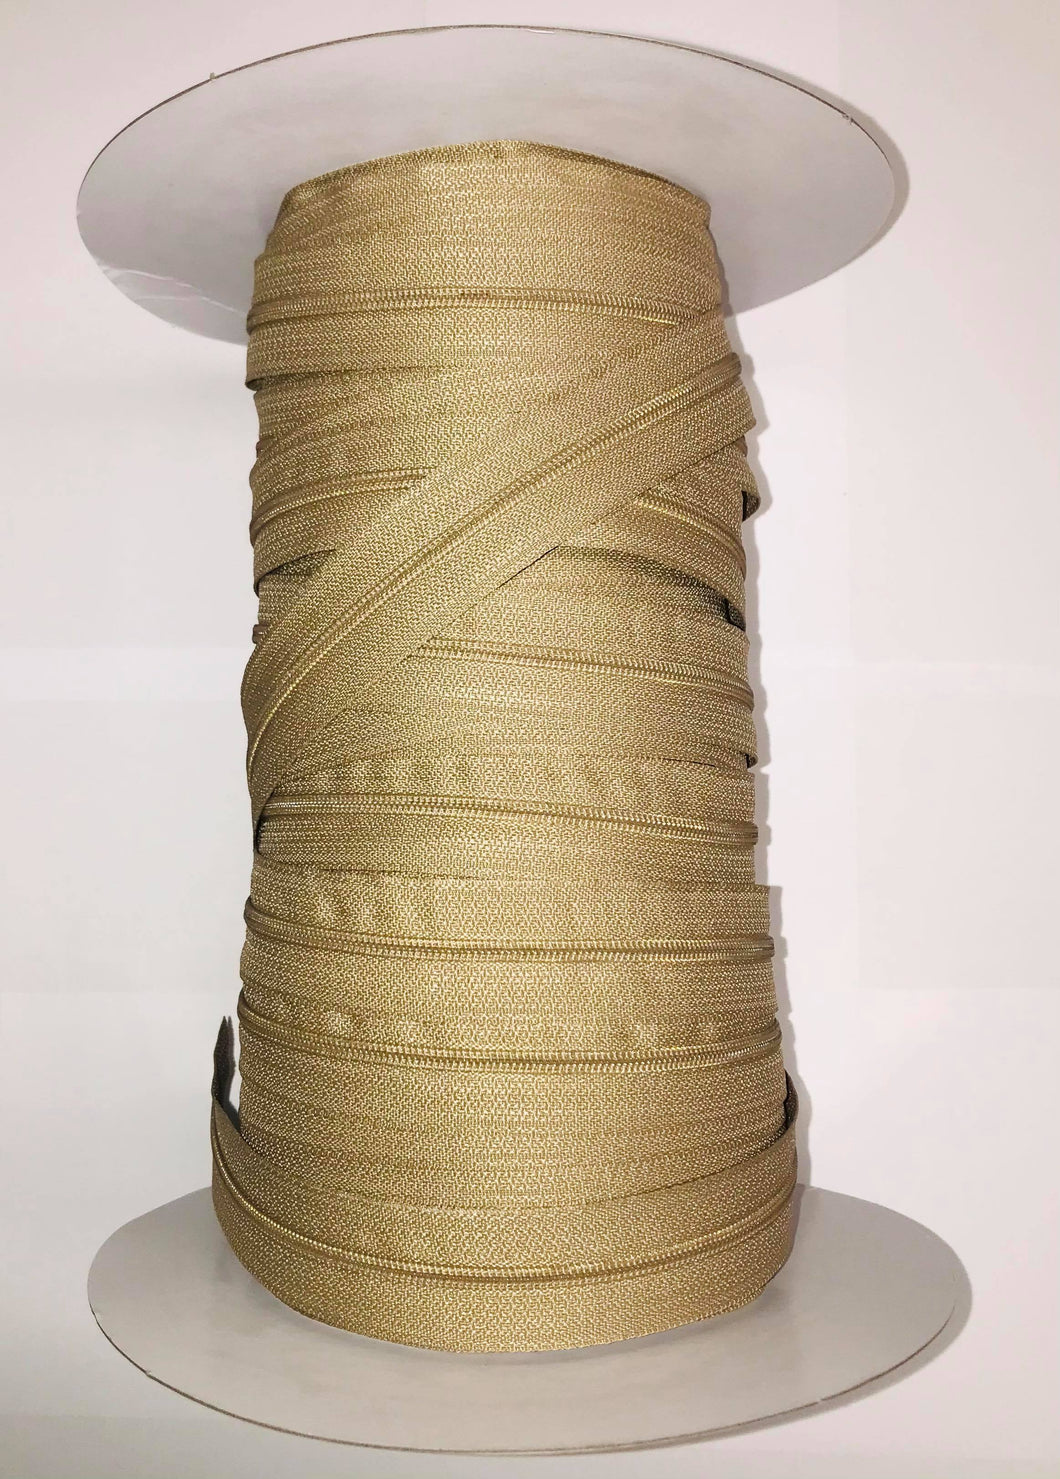 Our quality continuous beige zip is Ideal for all of your upholstery and sewing needs.    No 3 standard zip is ideal for scatters & Cushion covers.    